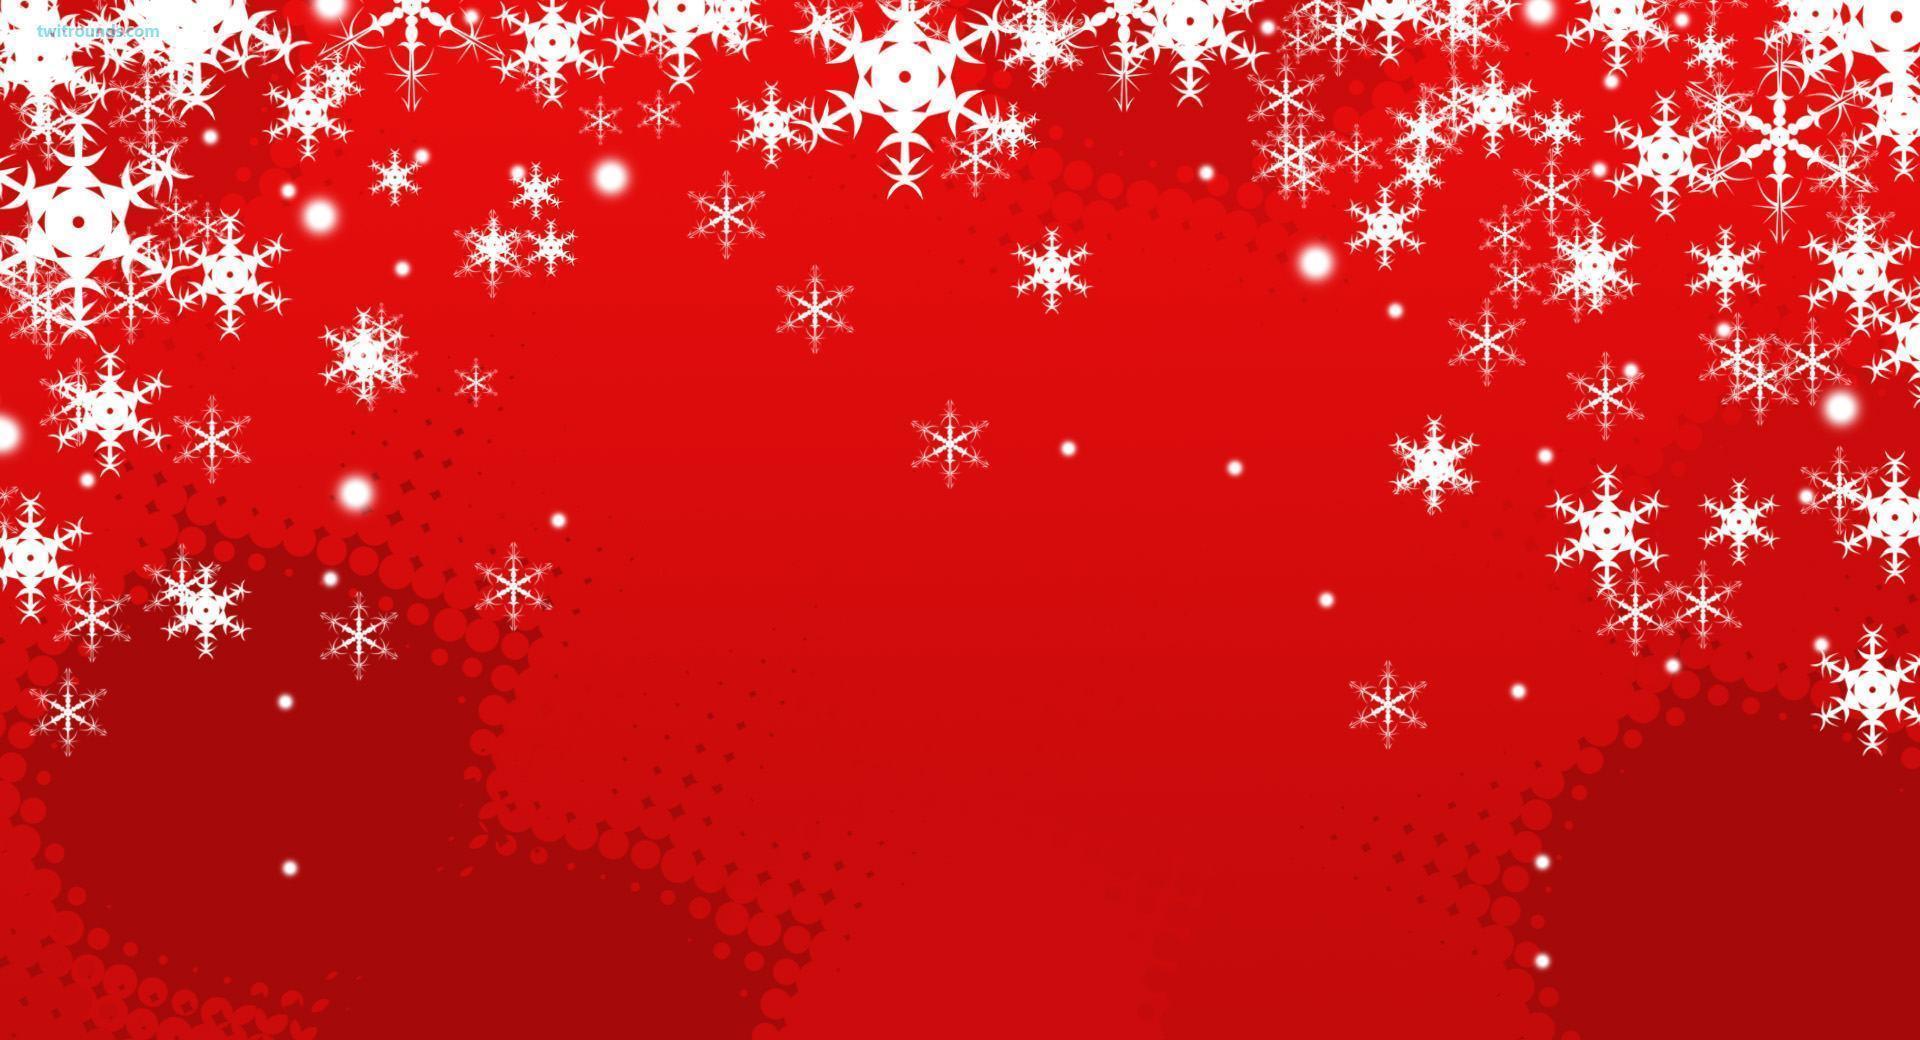 Happy Holidays Christmas white snowflakes desktop red background